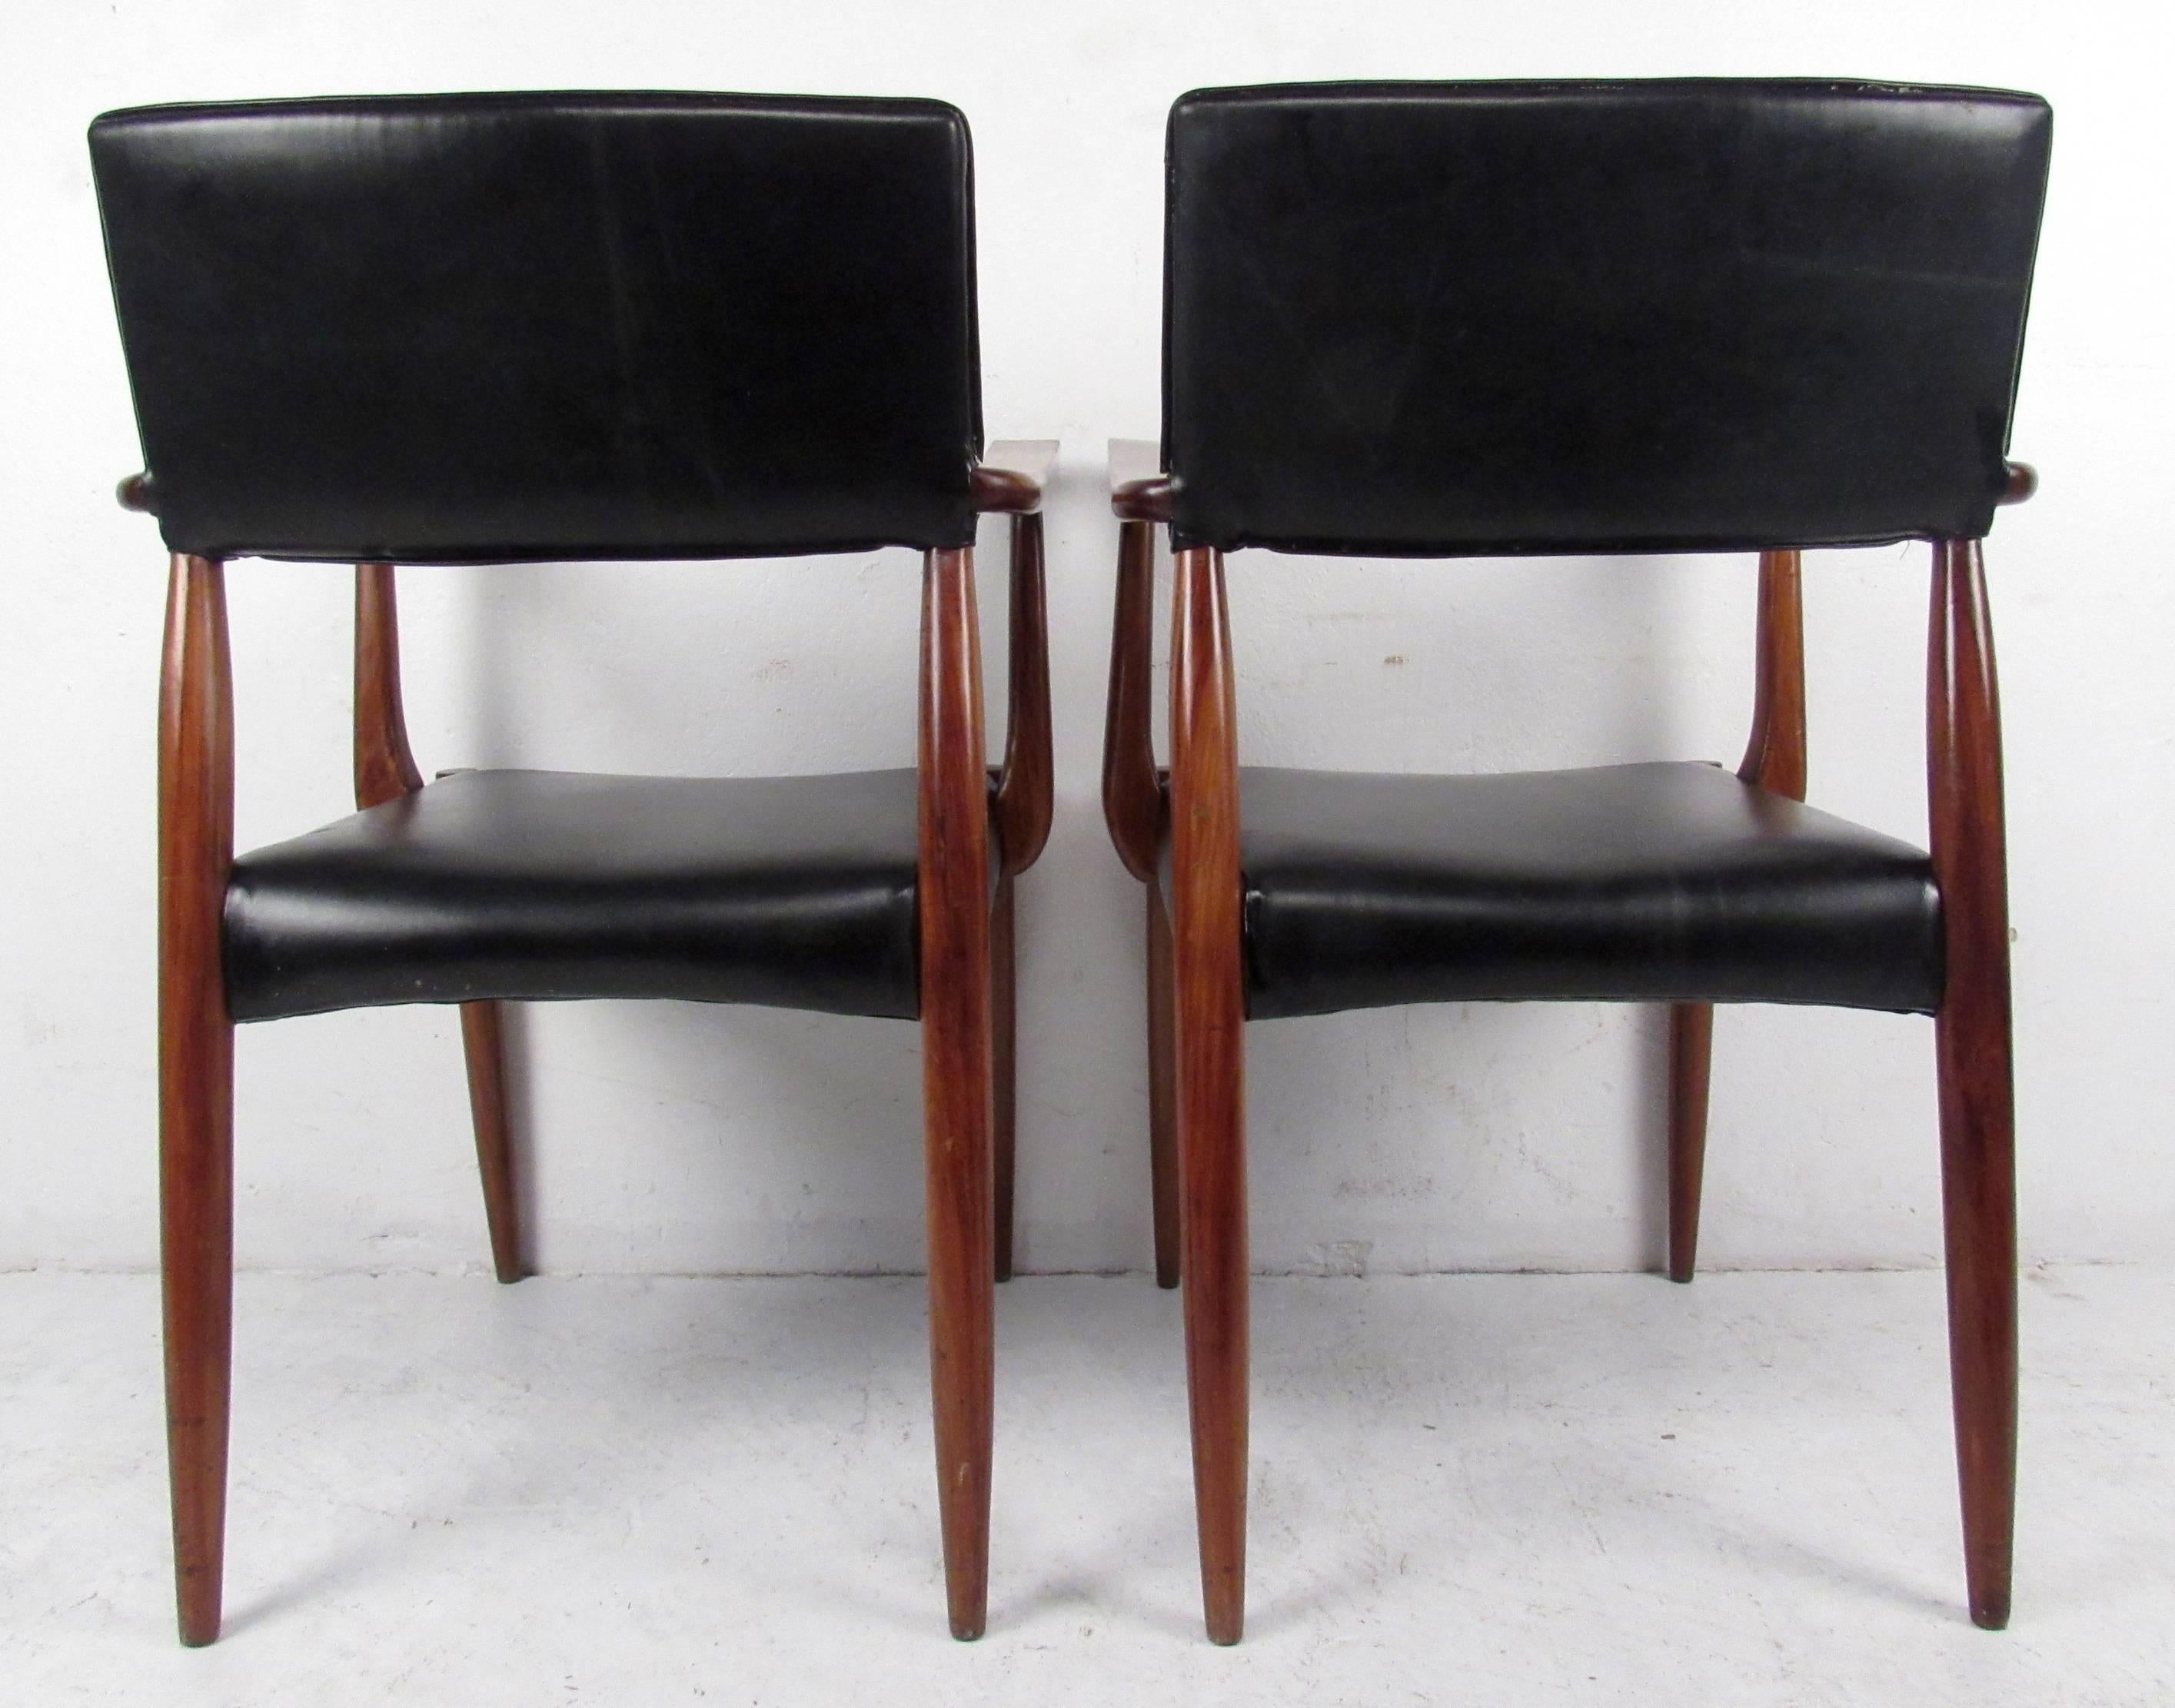 Mid-20th Century Scandinavian Rosewood and Leather Armchairs